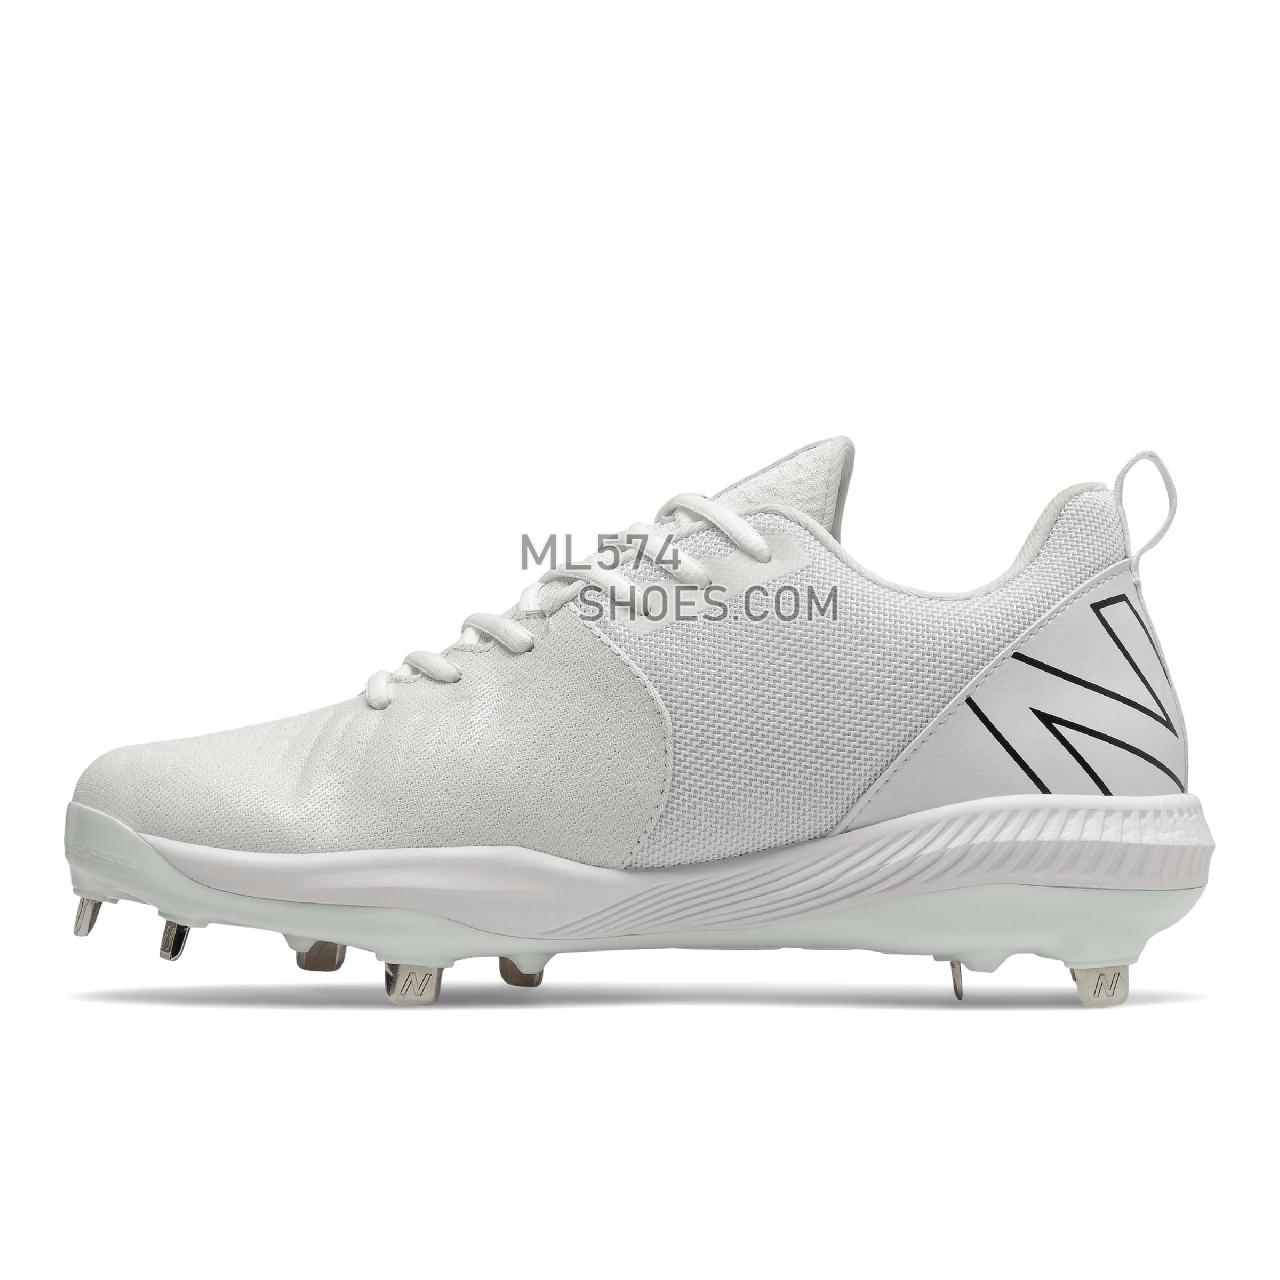 New Balance FuelCell 4040 v6 Metal - Men's Mid-Cut Baseball Cleats - White with Black - L4040TW6